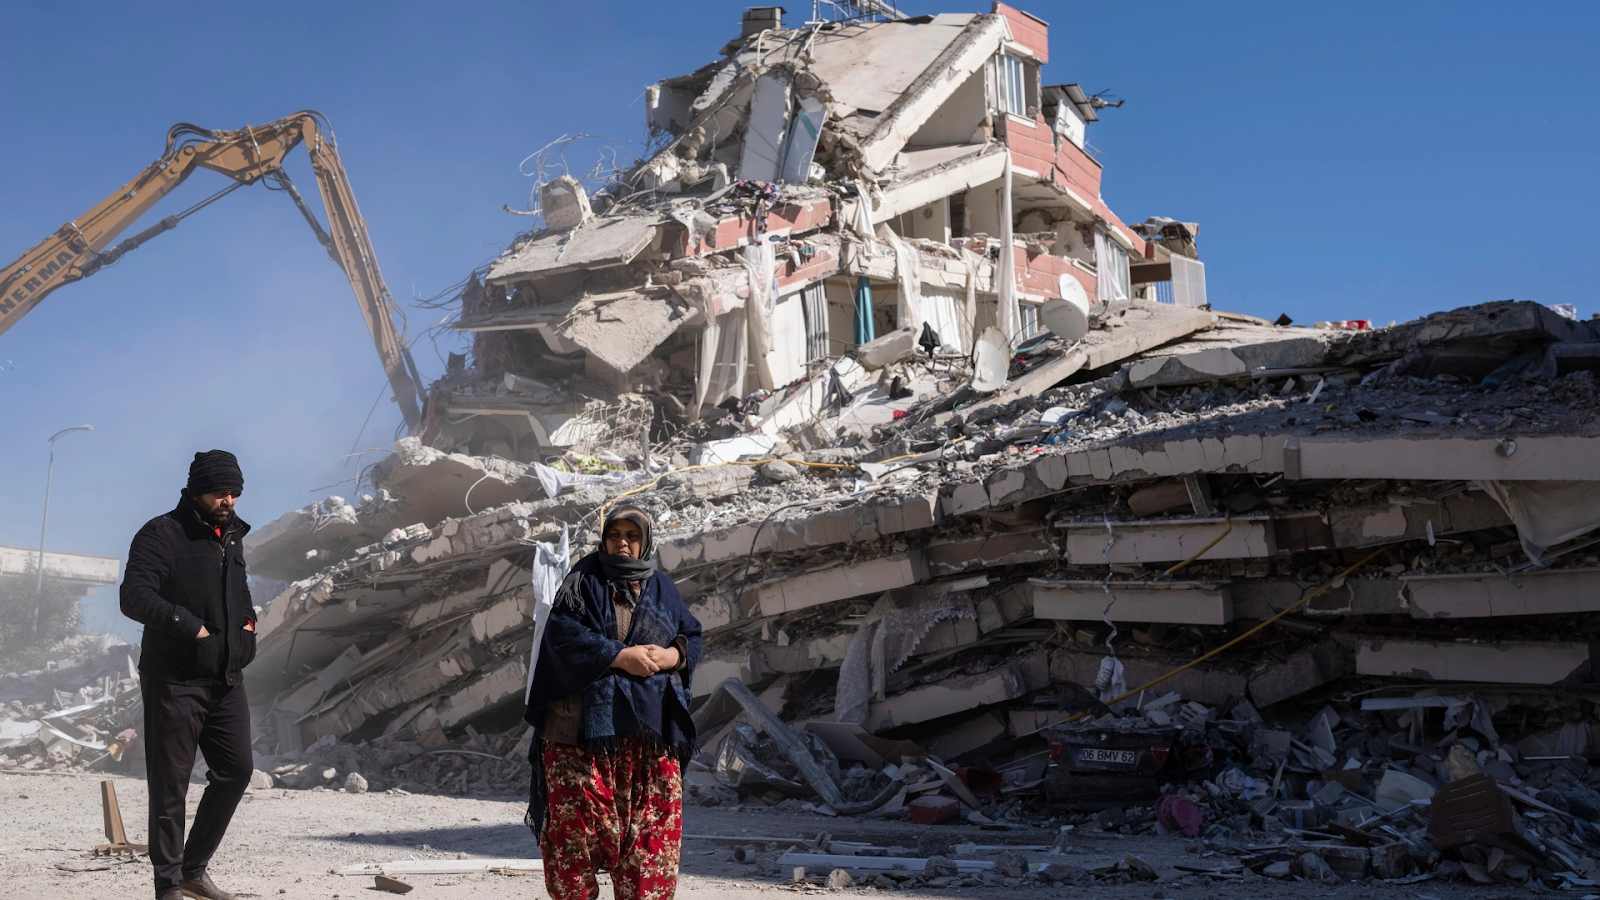 The Earthquake In Turkey And Syria Had Claimed 33,000 Lives